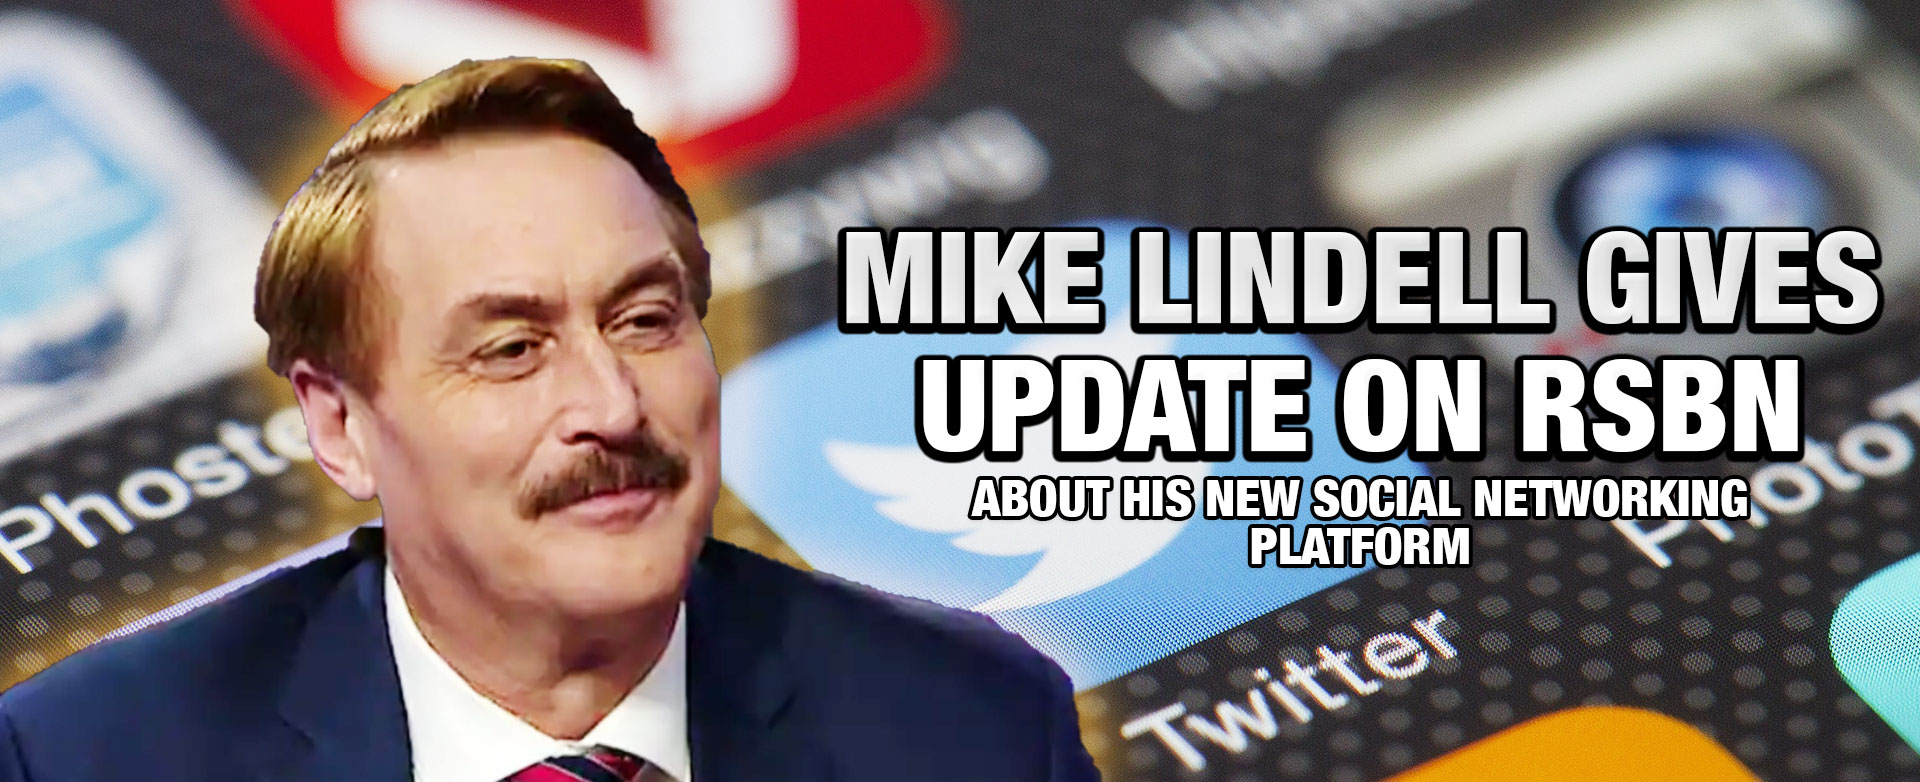 MyPatriotsNetwork-Mike Lindell Gives Update On RSBN About His New Social Networking Platform